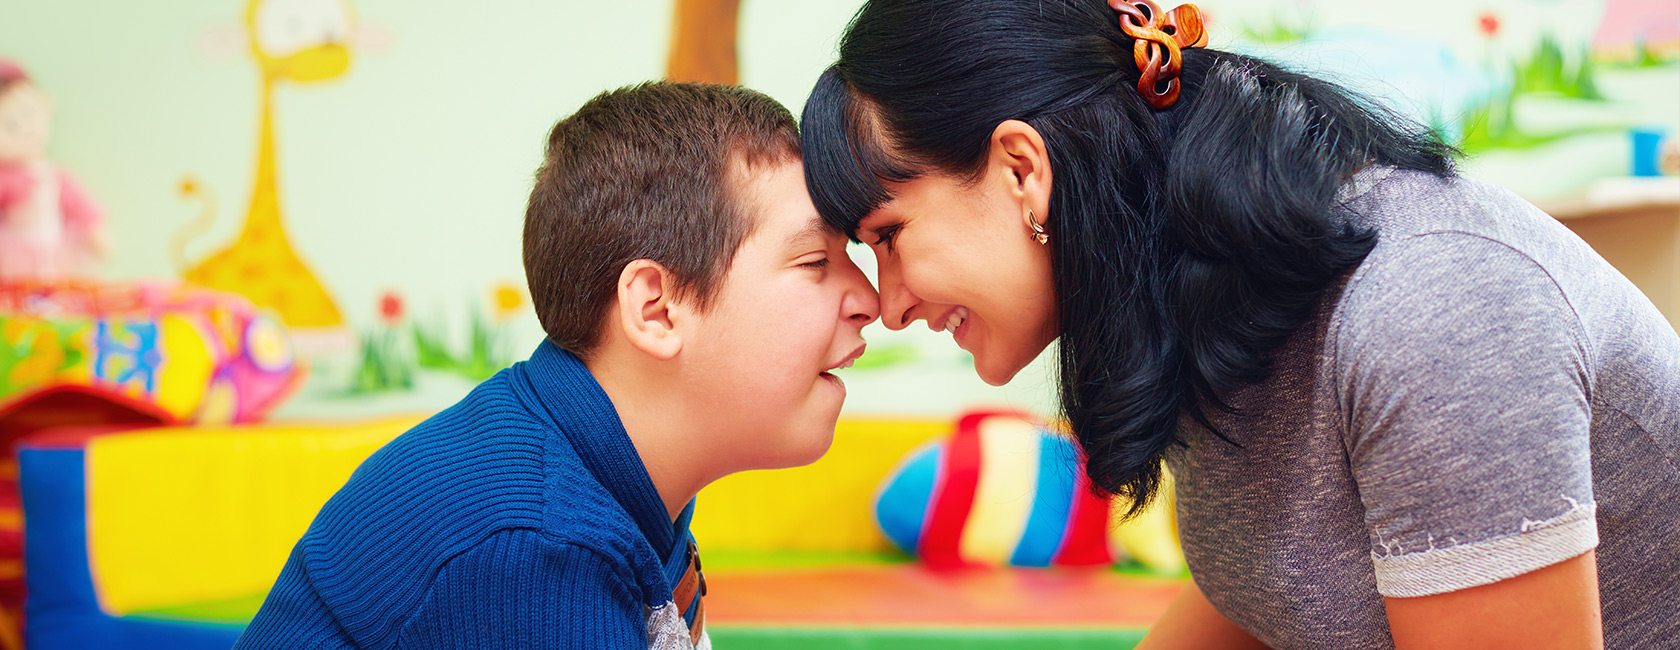 Careers Header - Happy Disabled Boy with Caring Lady